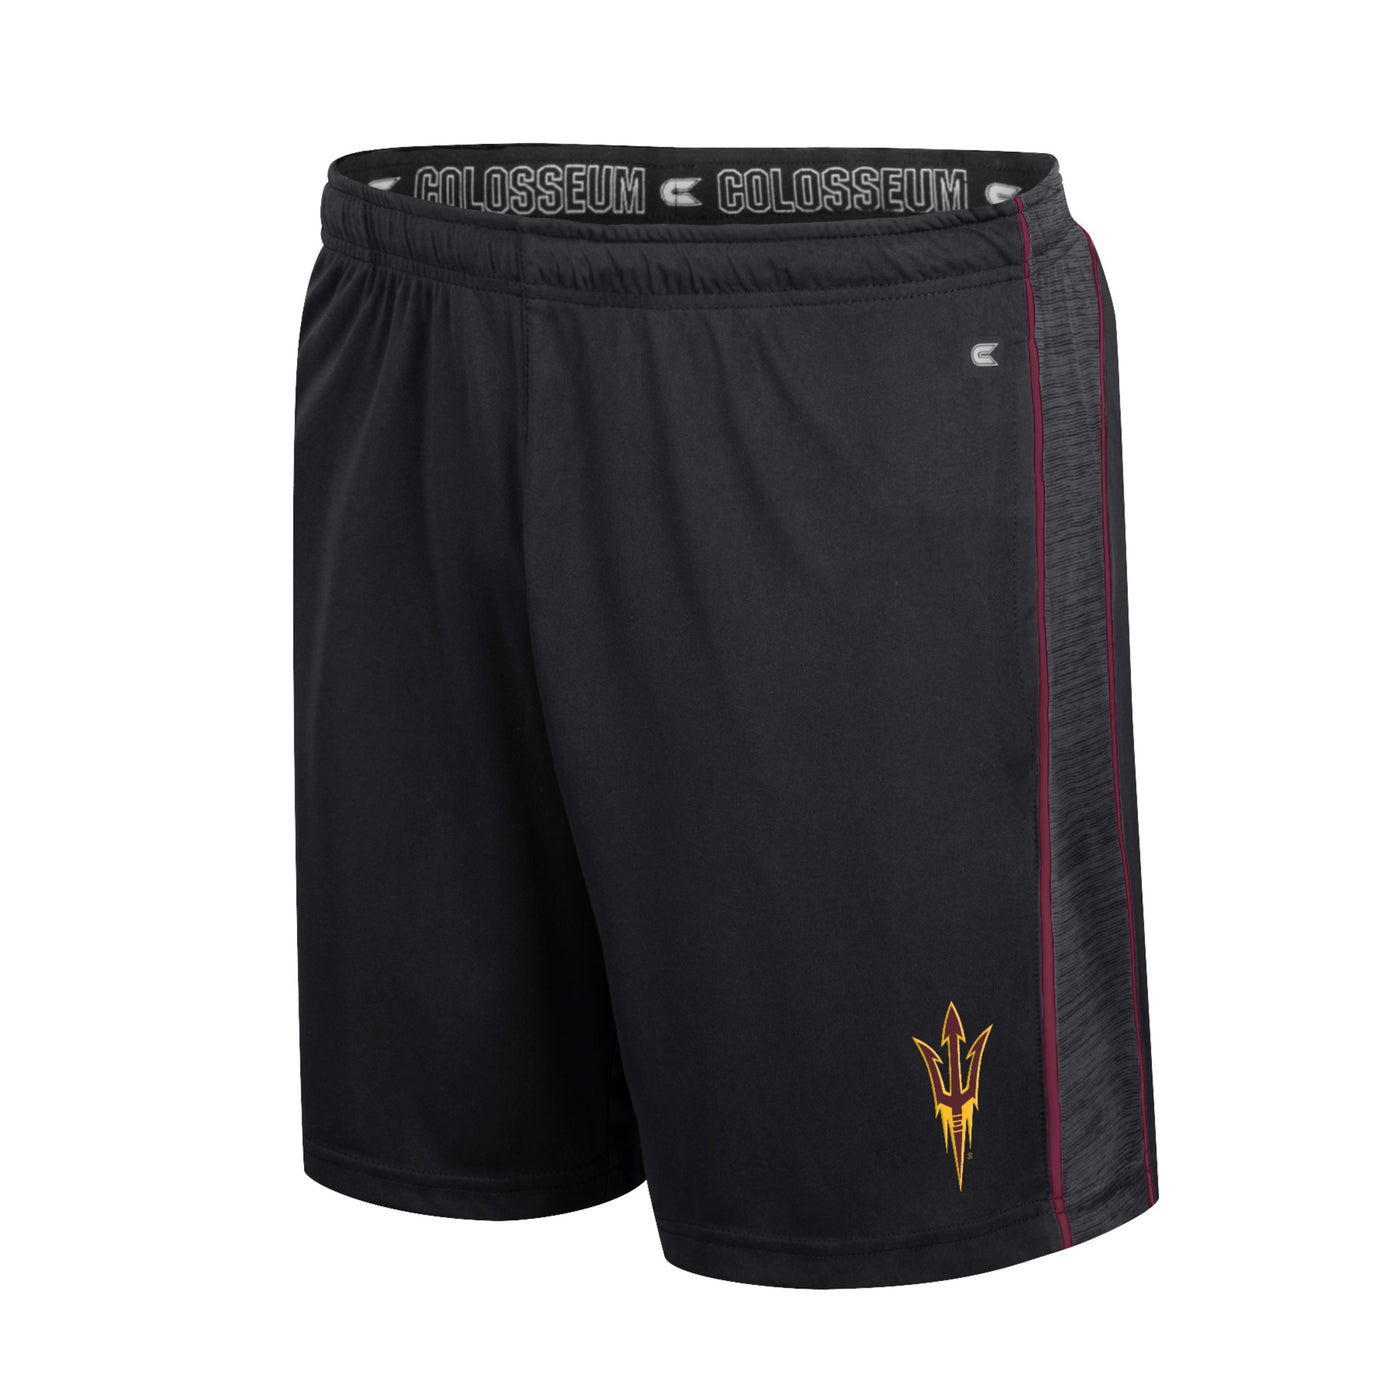 ASU black athletic shorts with maroon trimming and a heather gray side panel. On the front of the left leg is a pitchfork logo in maroon and outlined in gold. 